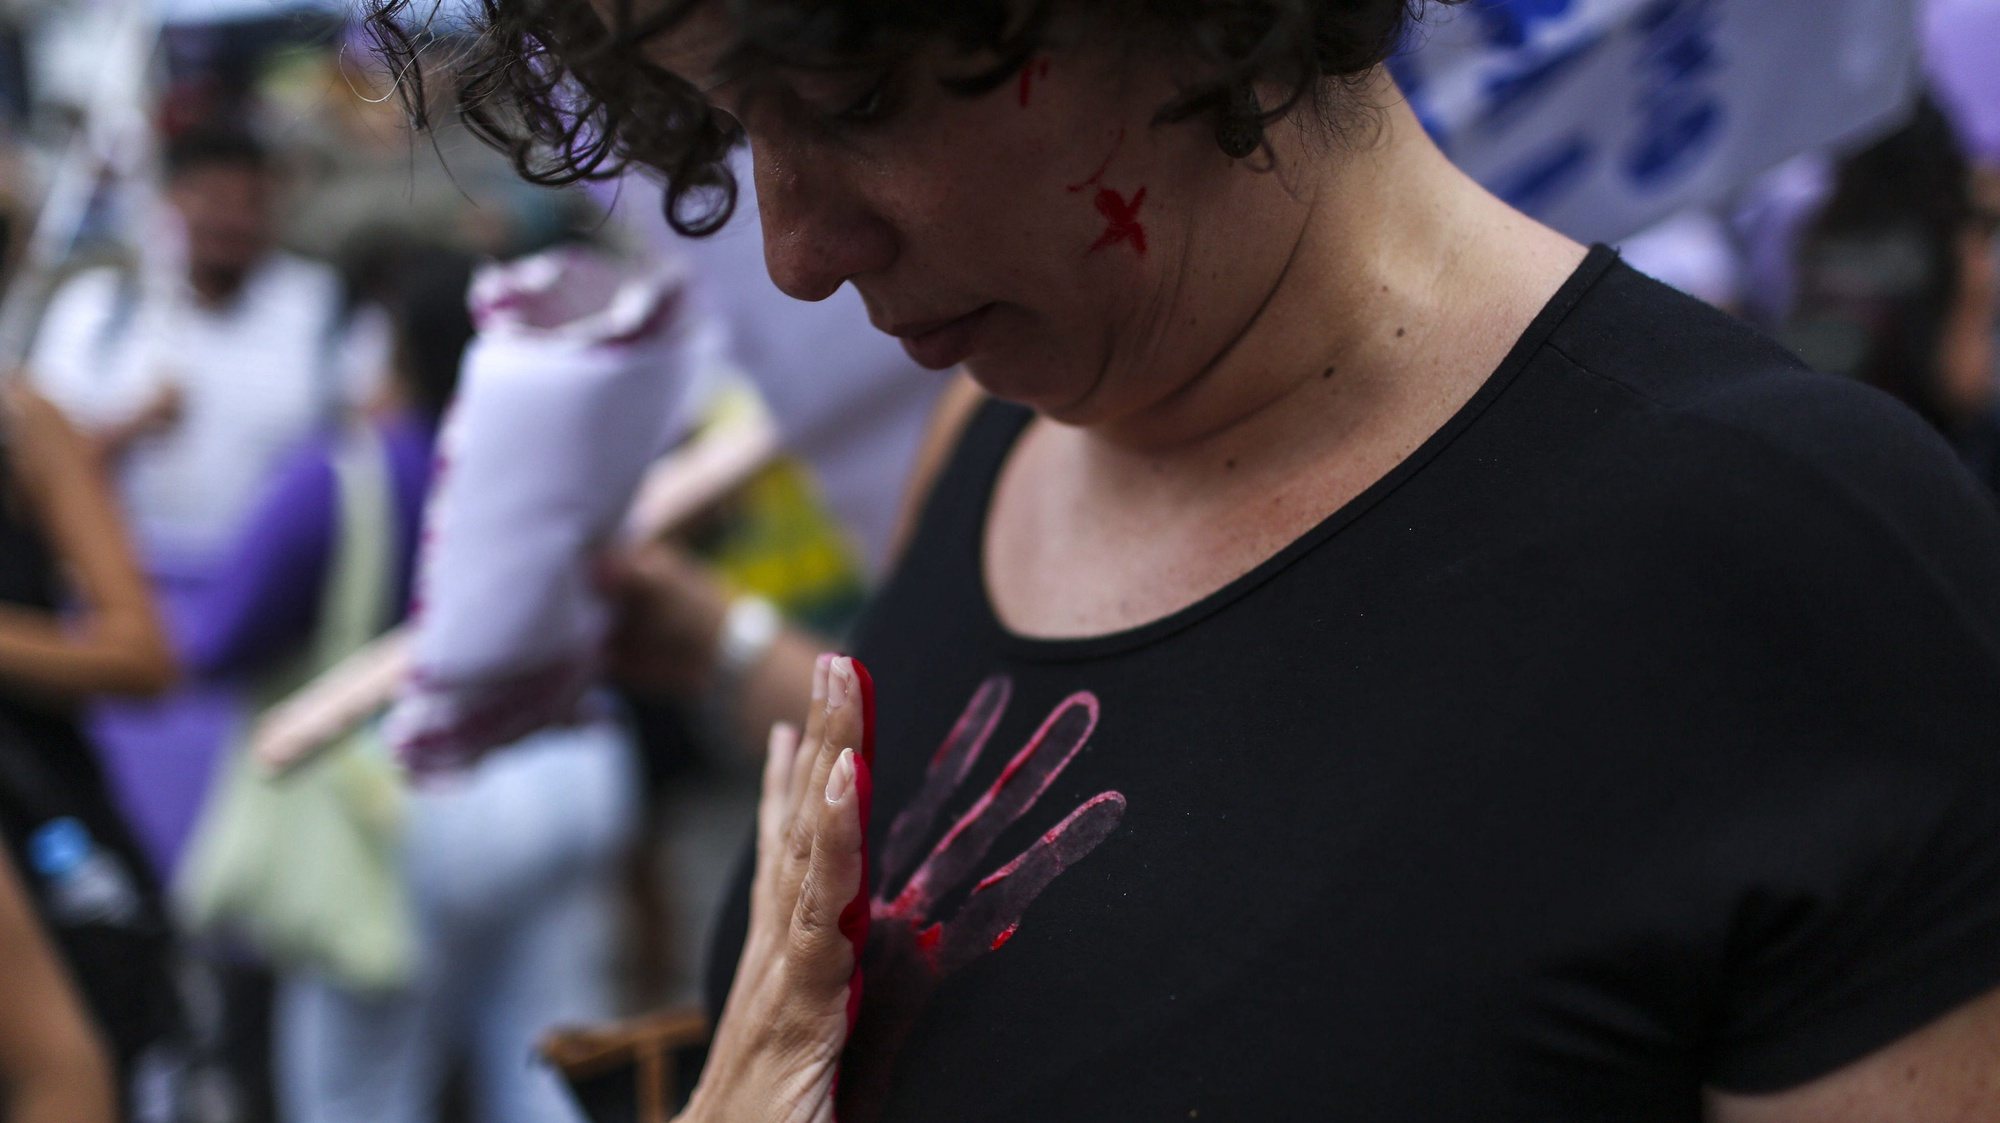 epa05602948 A woman participates at a protest against feminicide in Rio de Janeiro, Brazil, 25 October 2016. Under the slogan &#039;Not one less&#039; hundreds of women rallied in order to ask for the eradication of such crimes in Latin America.  EPA/ANTONIO LACERDA